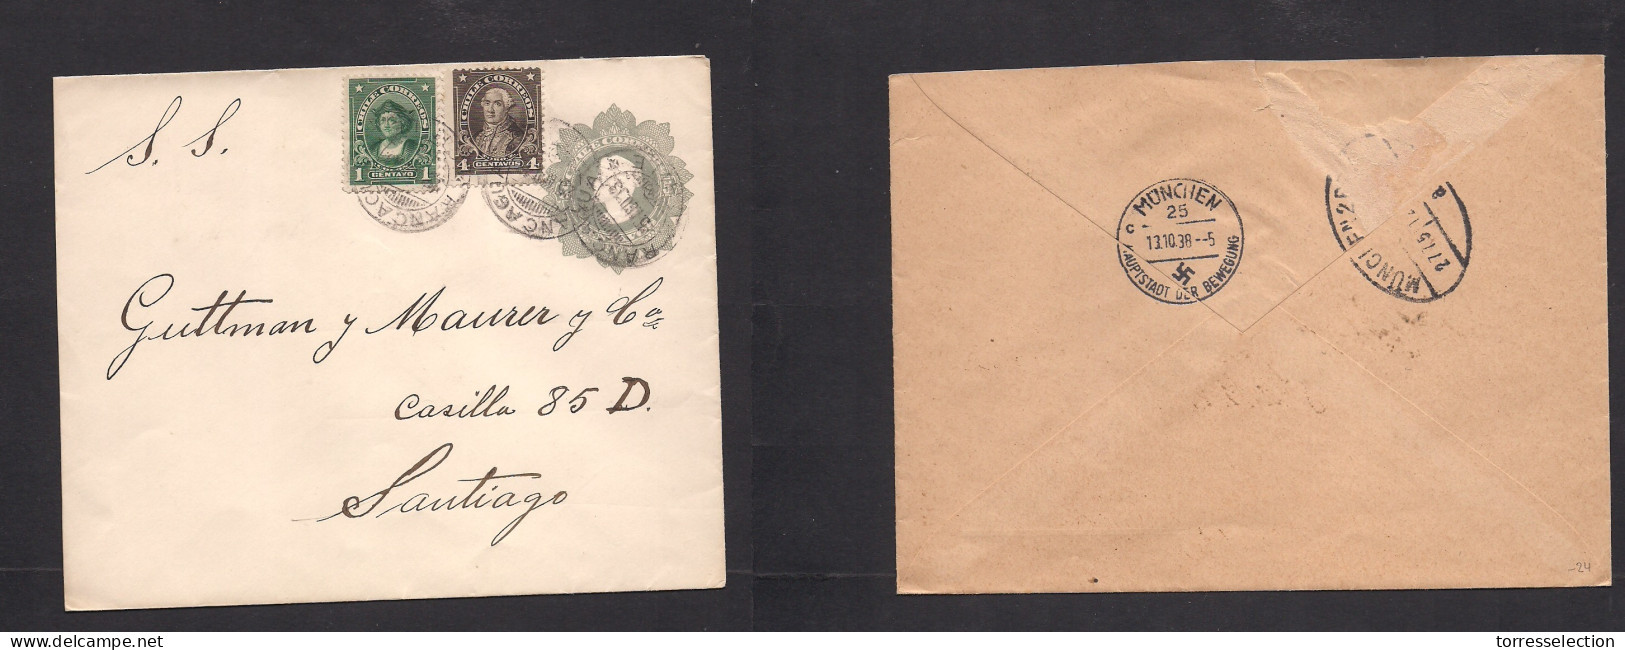 SYRIA. 1938. Aleppo - Germany, Munich (13 Oct) Registered Comercial Fkd Env. XSALE. - Syrie